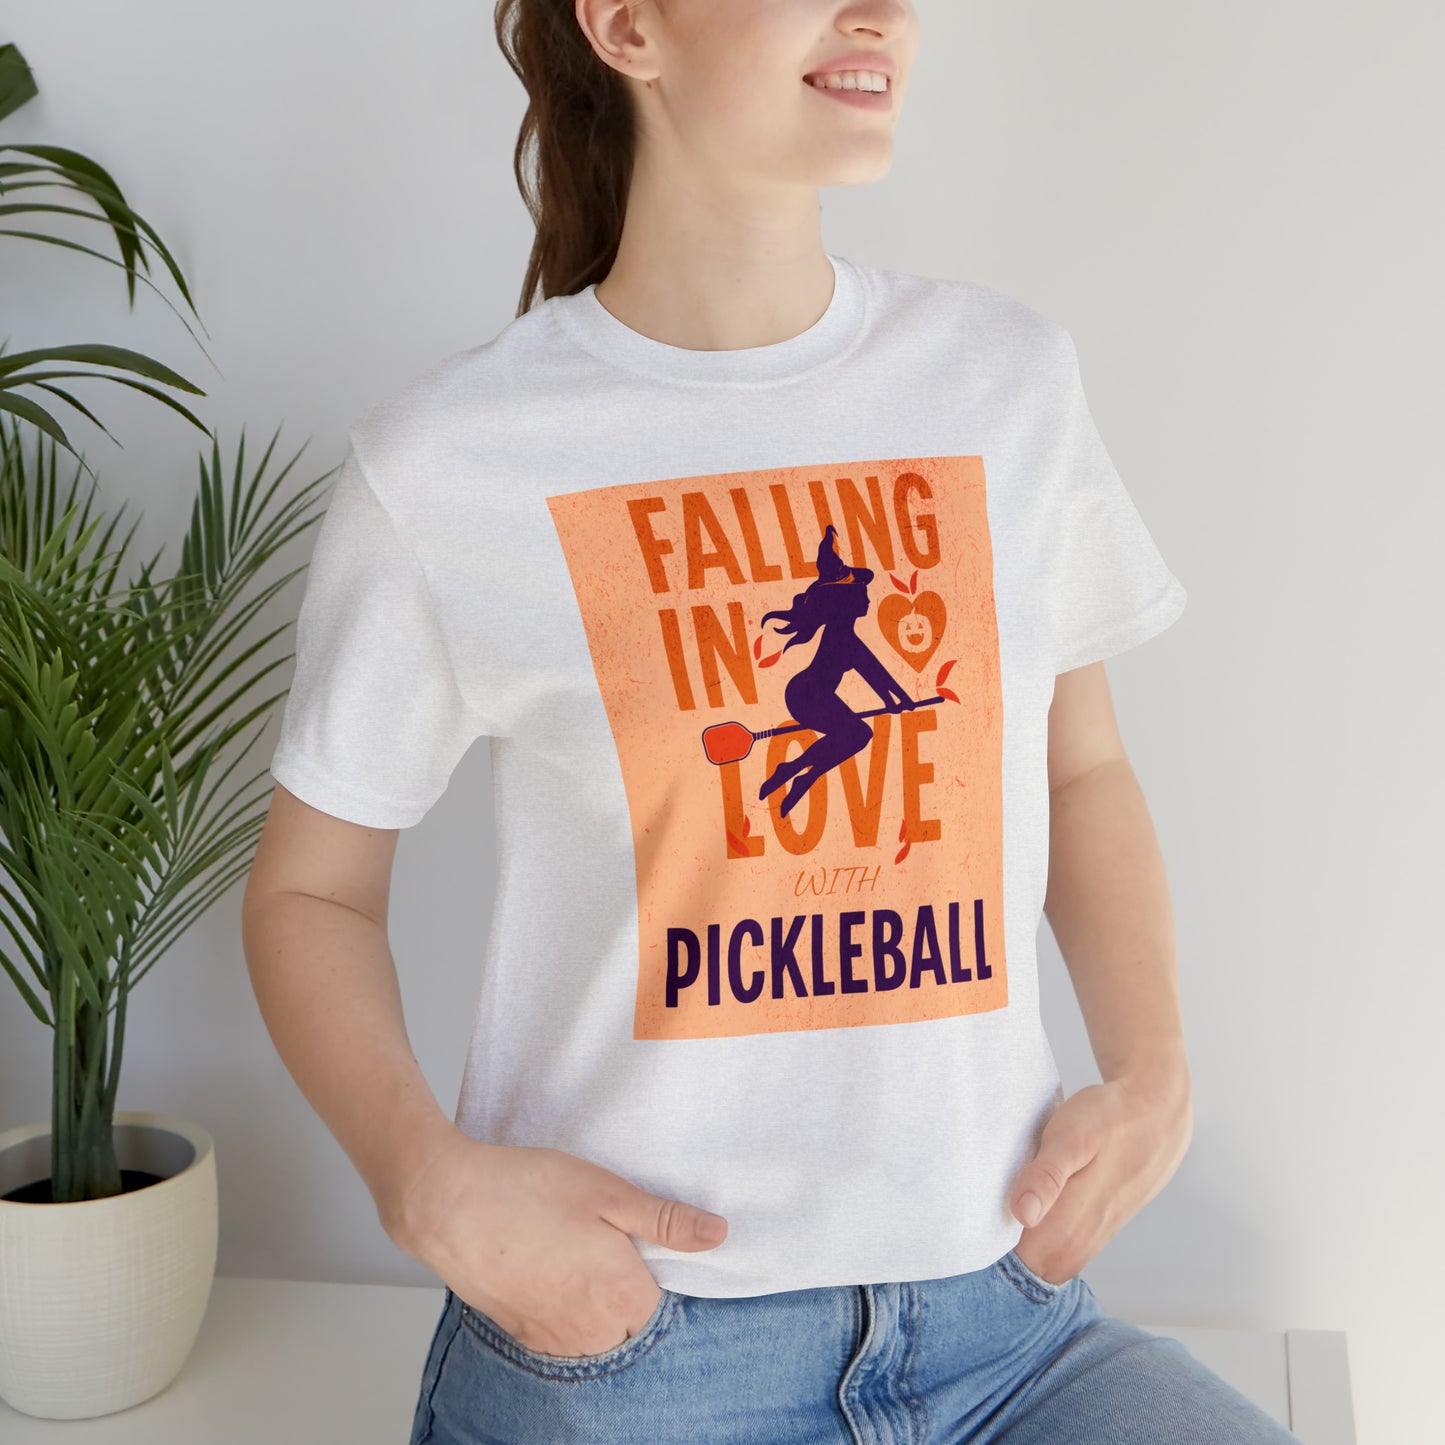 FALLing in Love with Pickleball - Halloween T-Shirt